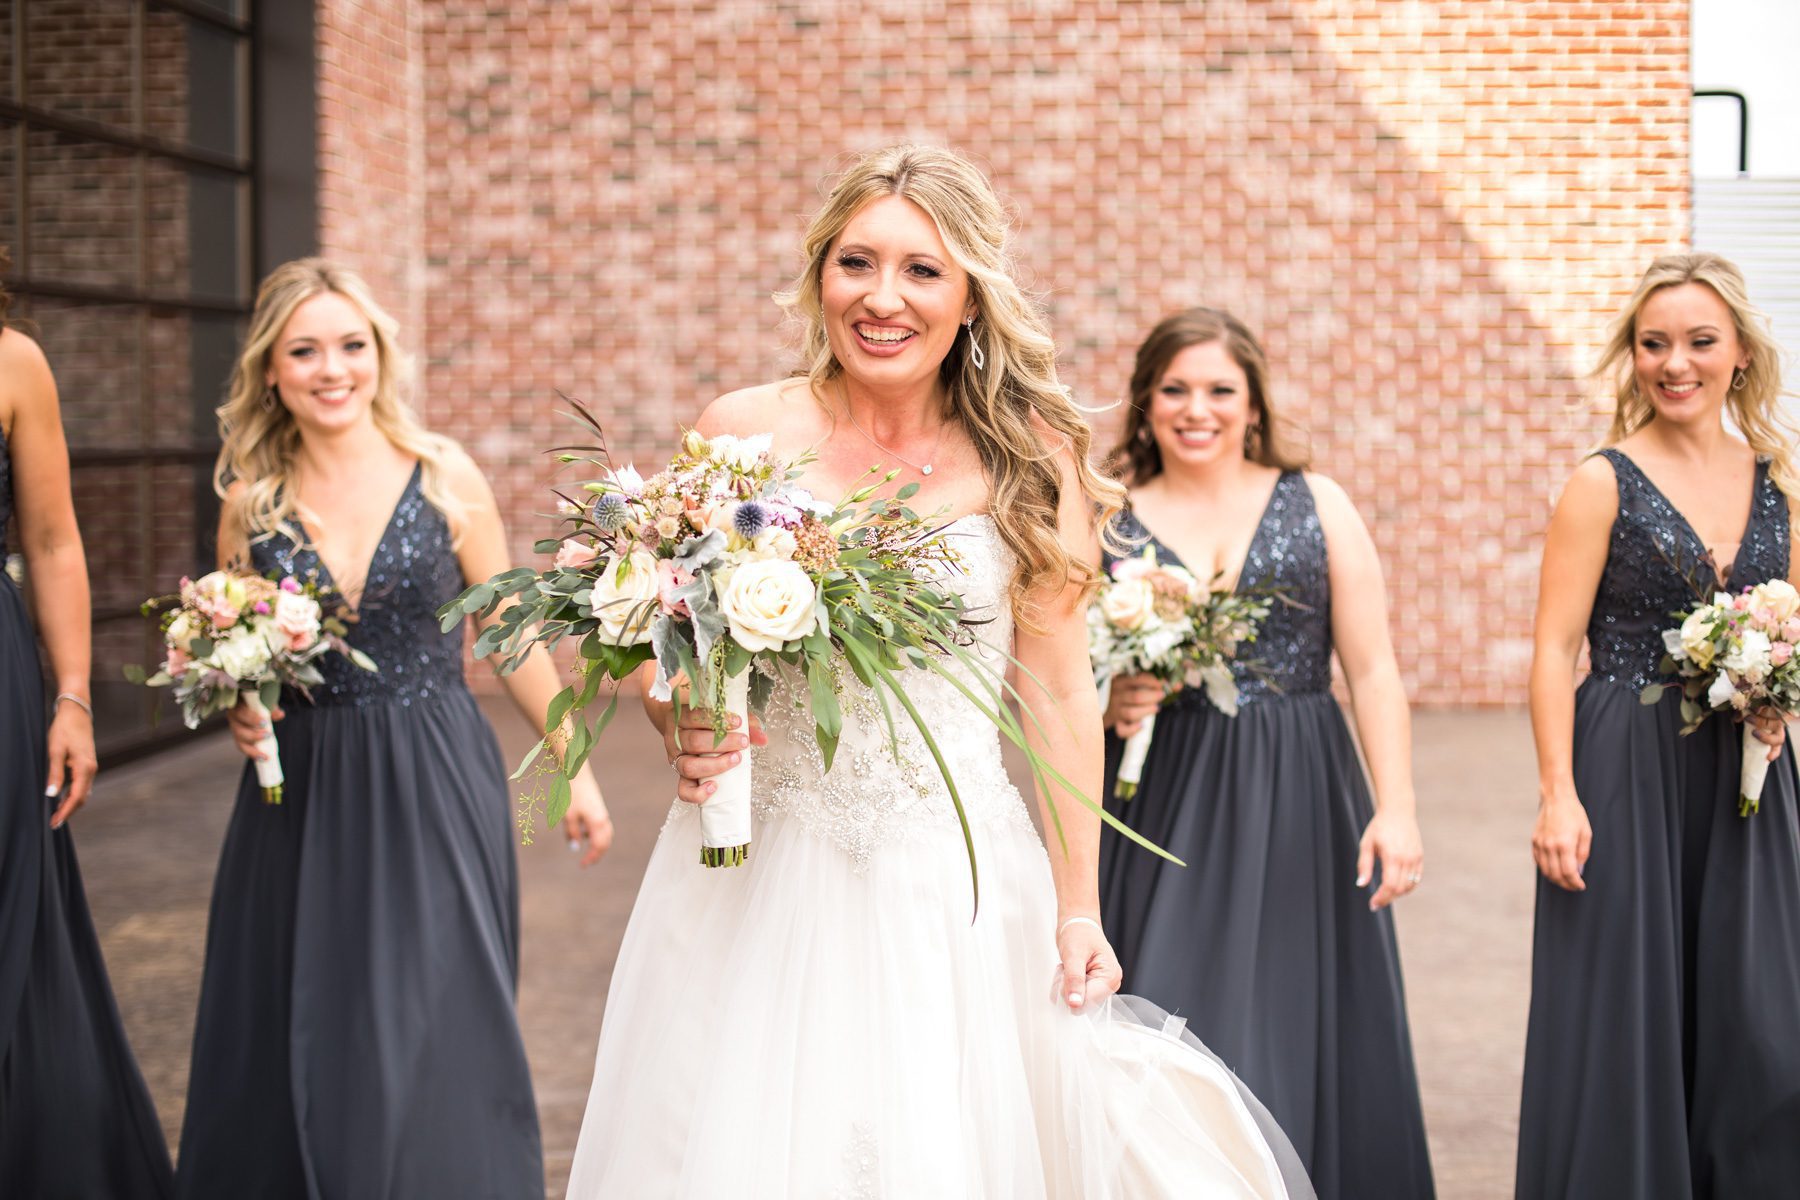 Bride with bridesmaids Clarksville, TN Old Glory Distilling Go.